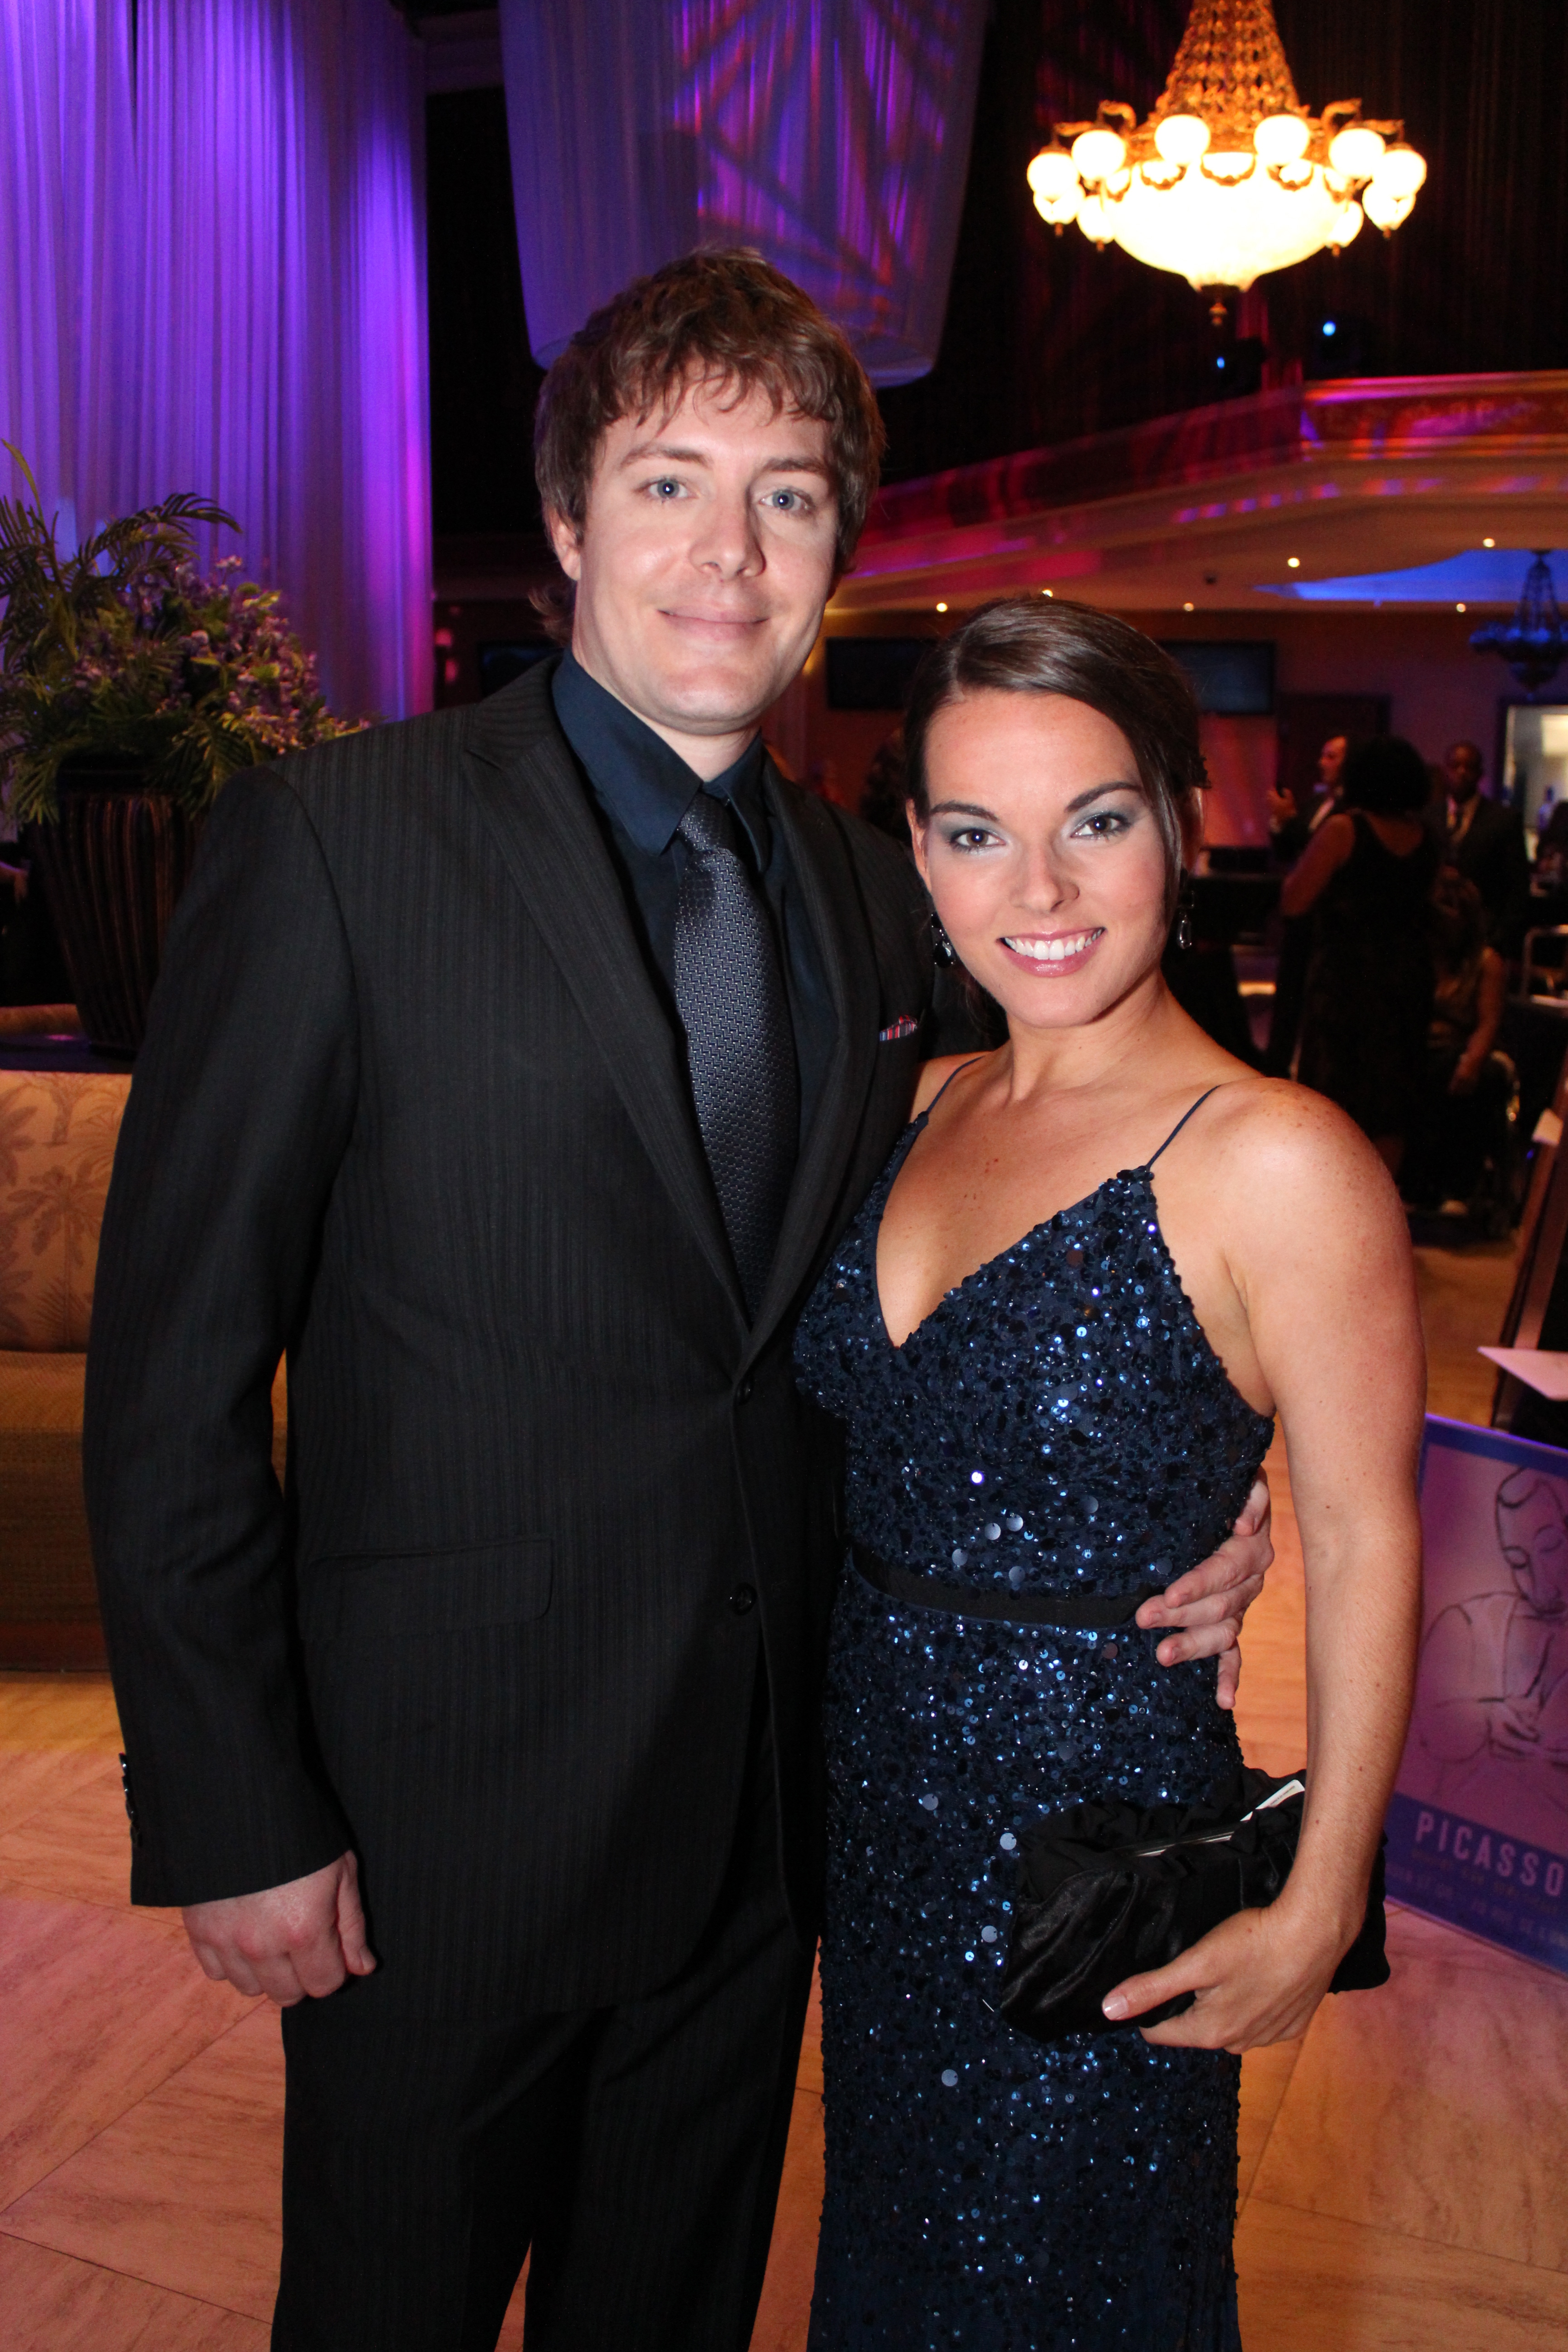 Keri Maletto with her husband, Sound MIxer, Chris Giles at the 2012 Women in the Arts Awards Ceremony in Miami.